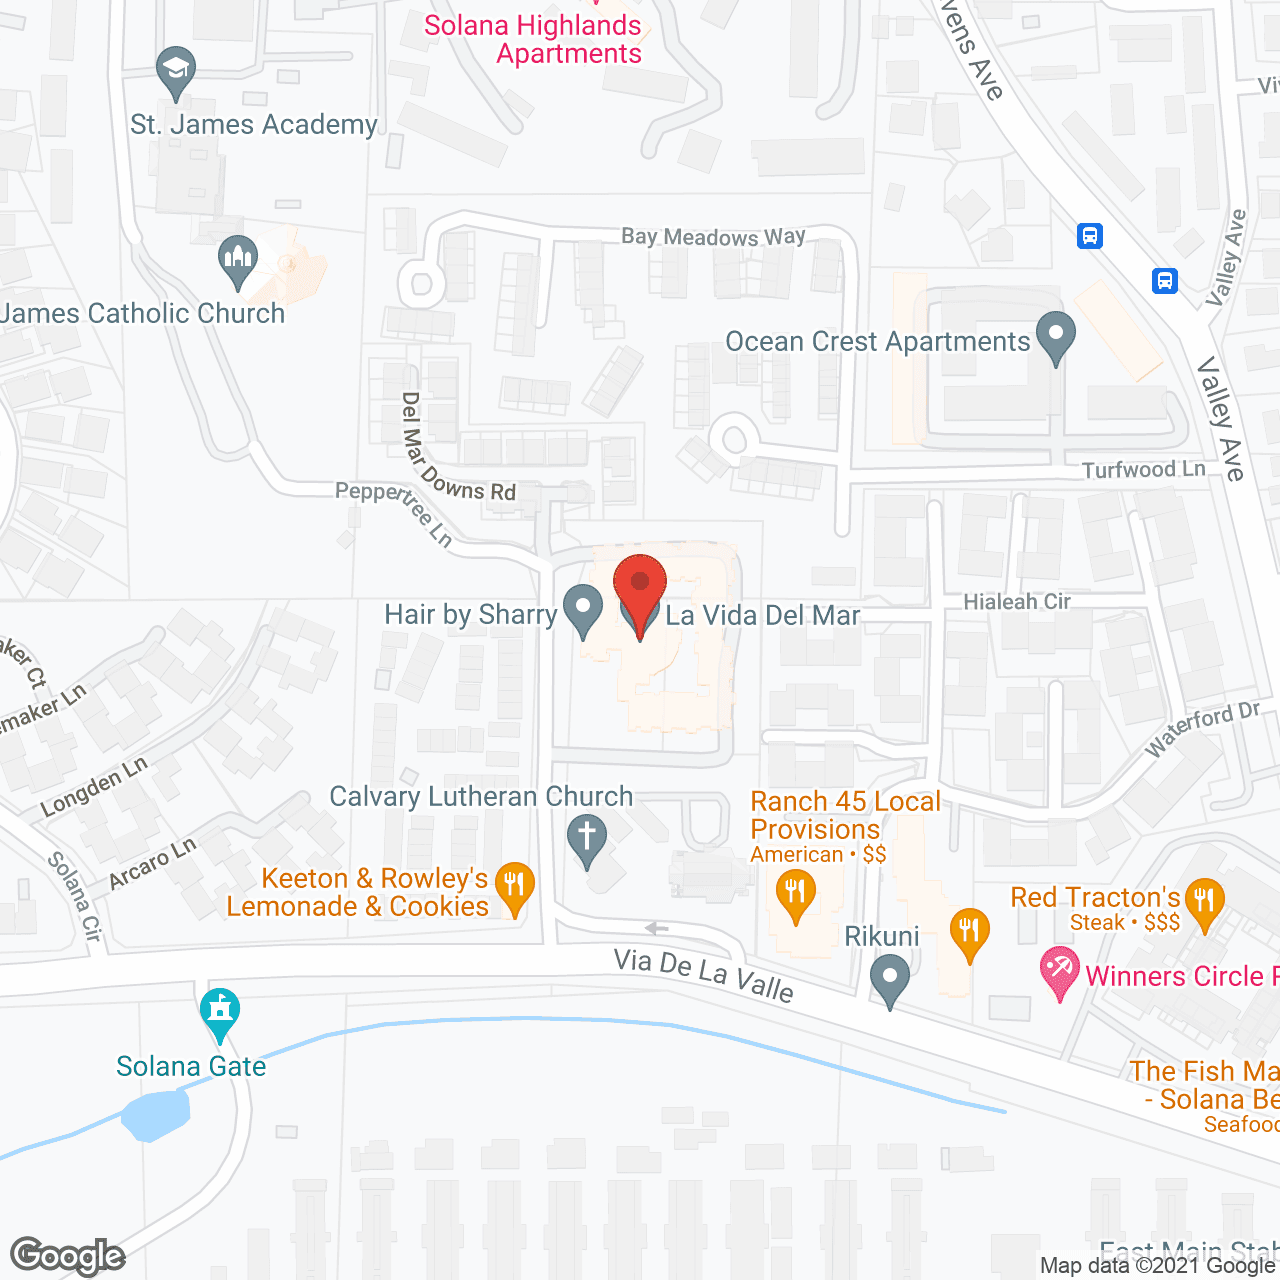 Ivy Park at Mission Viejo-DUPE Listing in google map